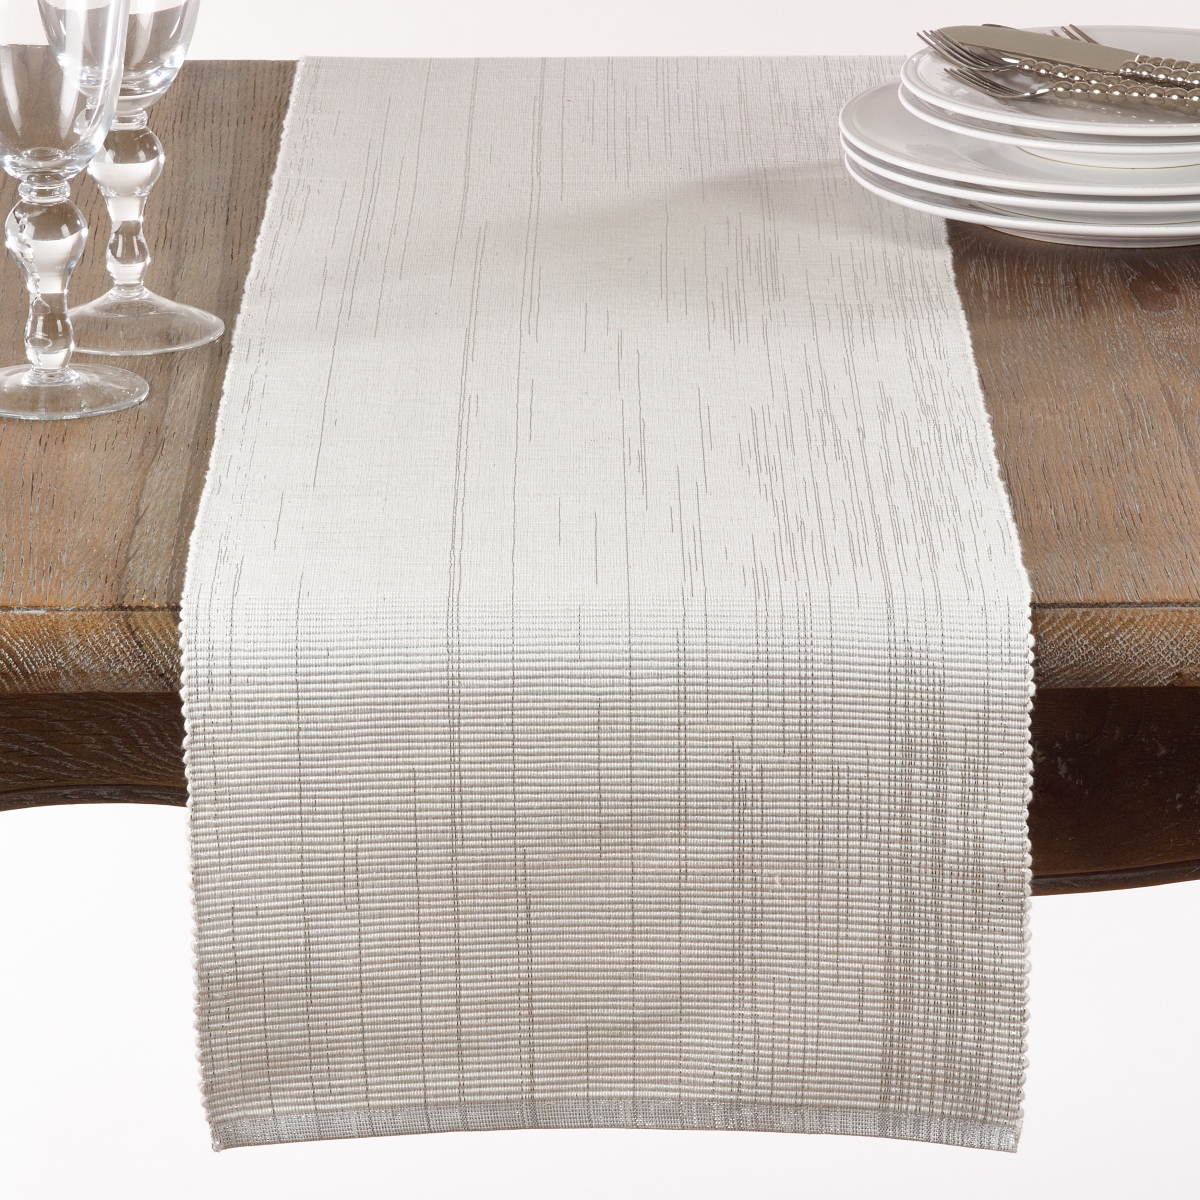 Picture of Saro Lifestyle 119.W13120B 13 x 120 in. Shimmering Woven Cotton Ribbed Table Runner, White